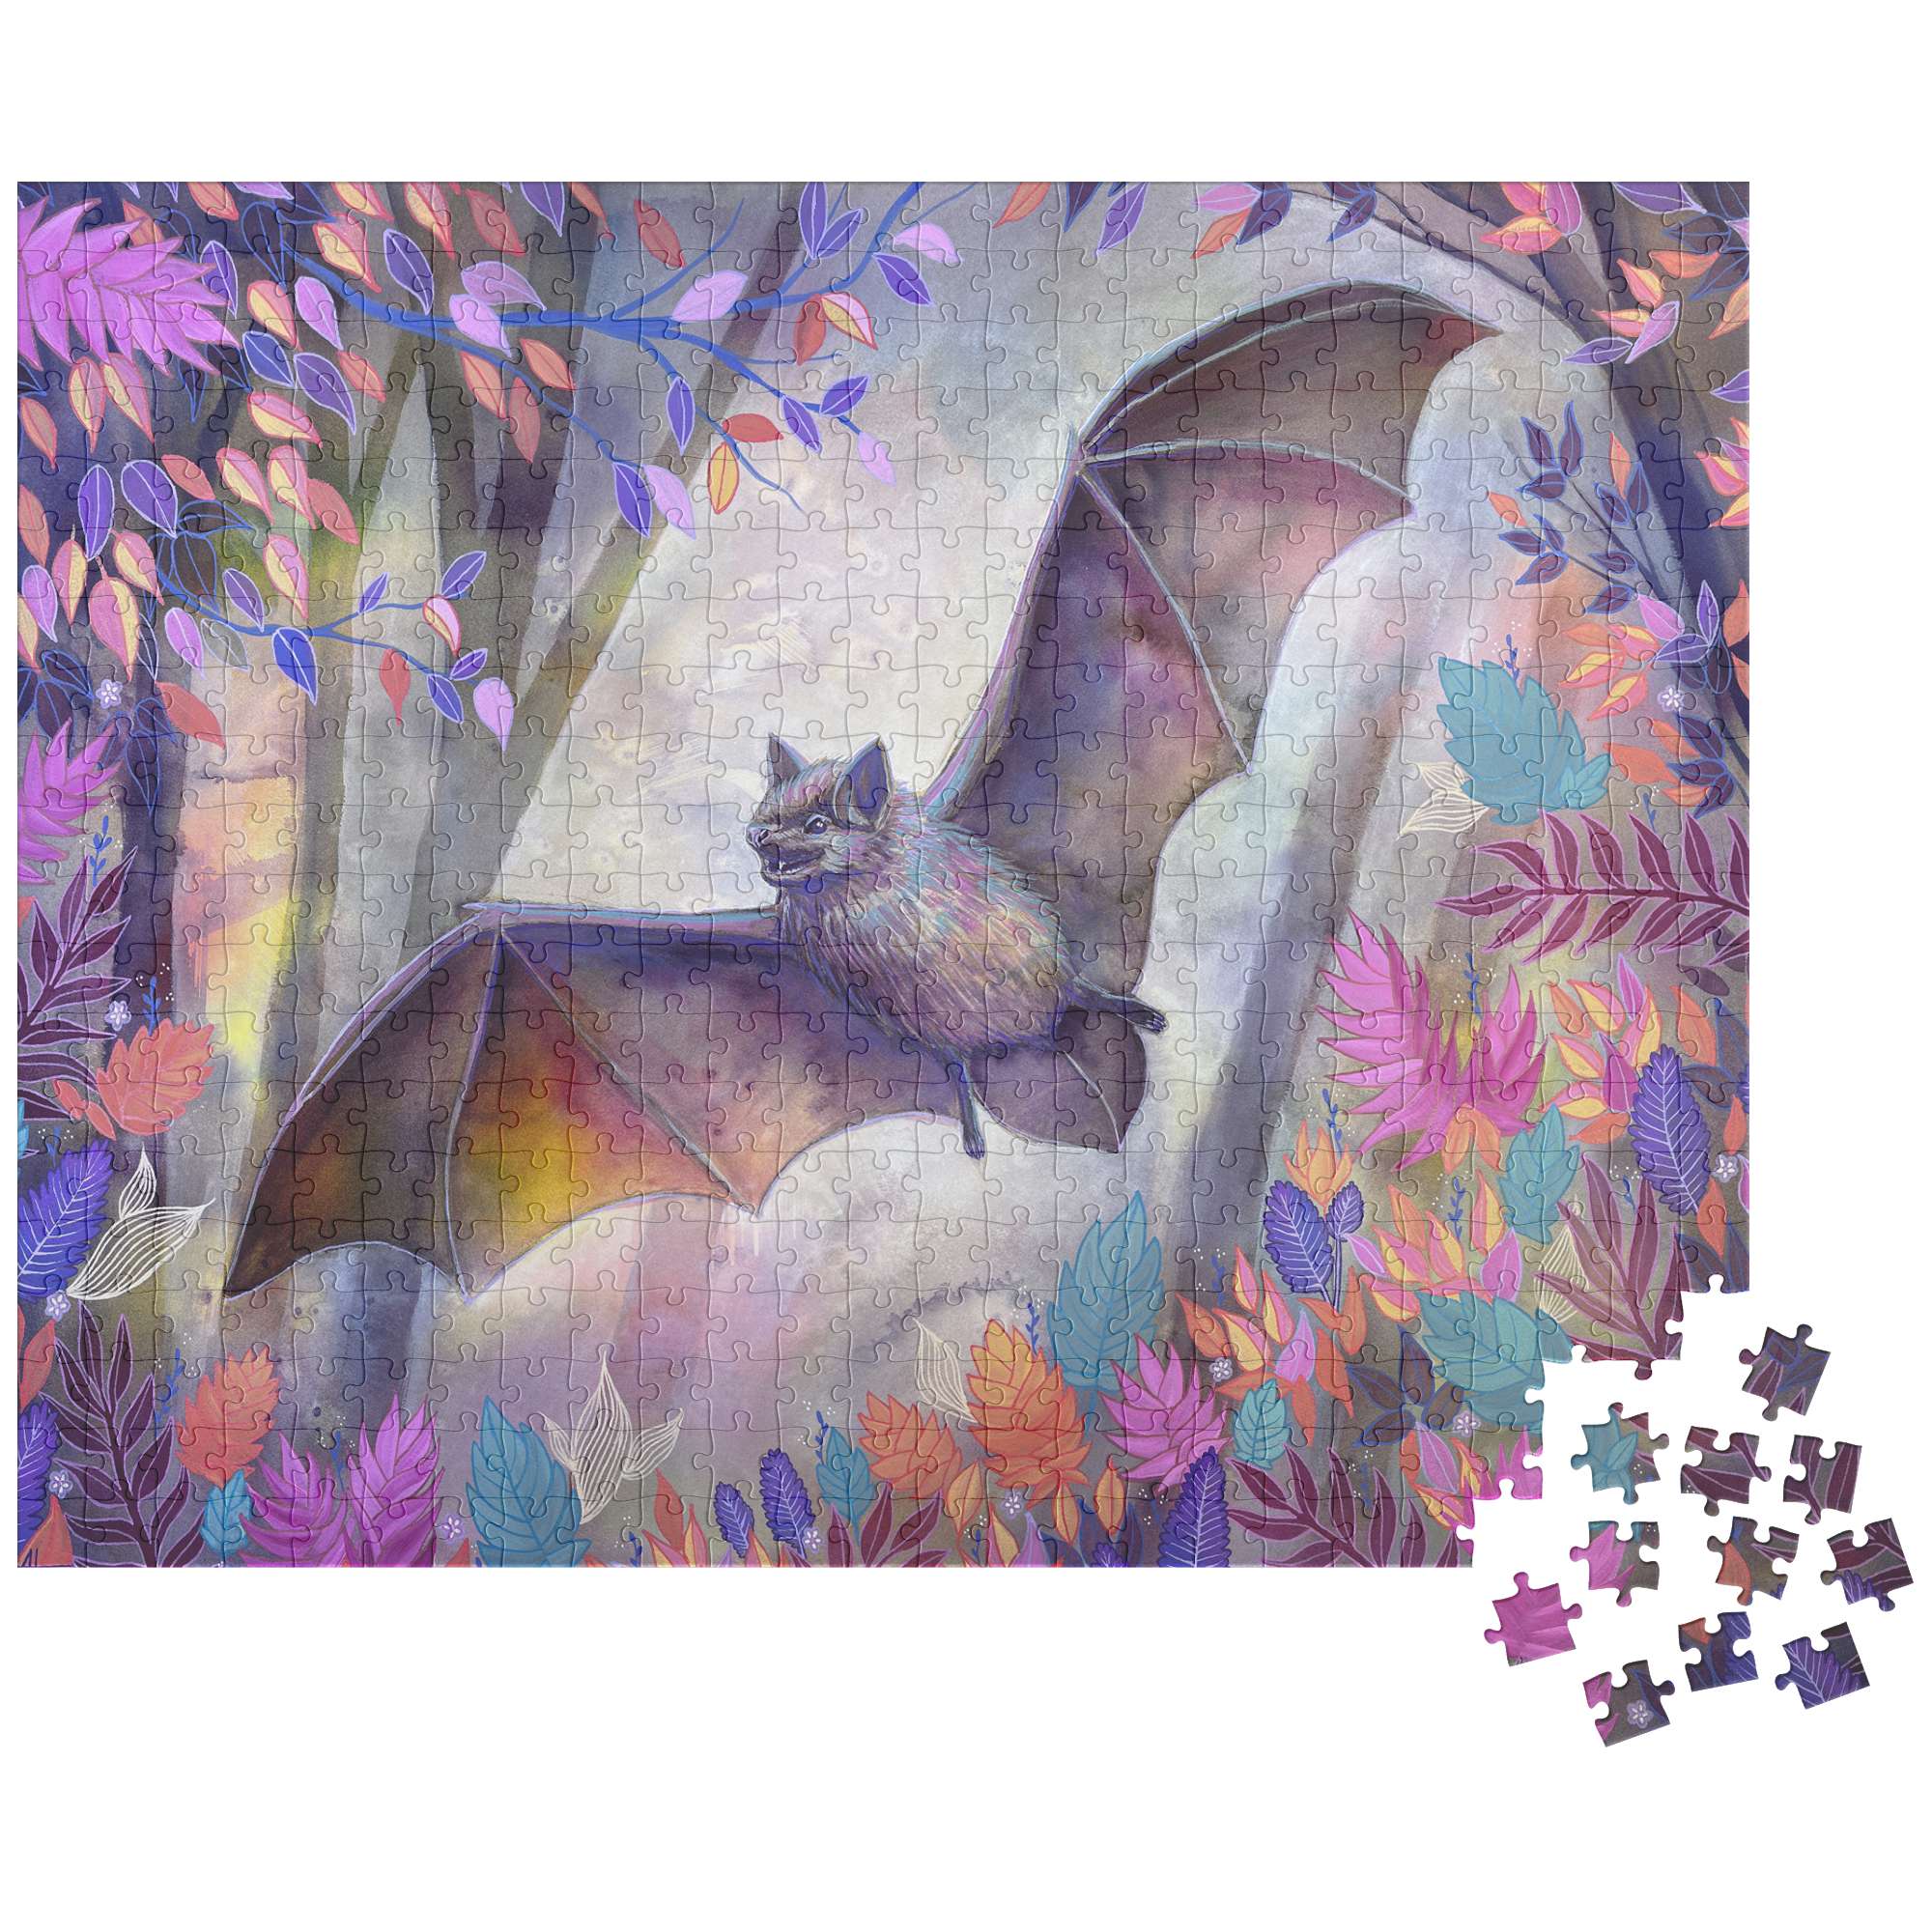 Bat Puzzle of a flying bat amid colorful foliage, partially completed with loose pieces nearby.